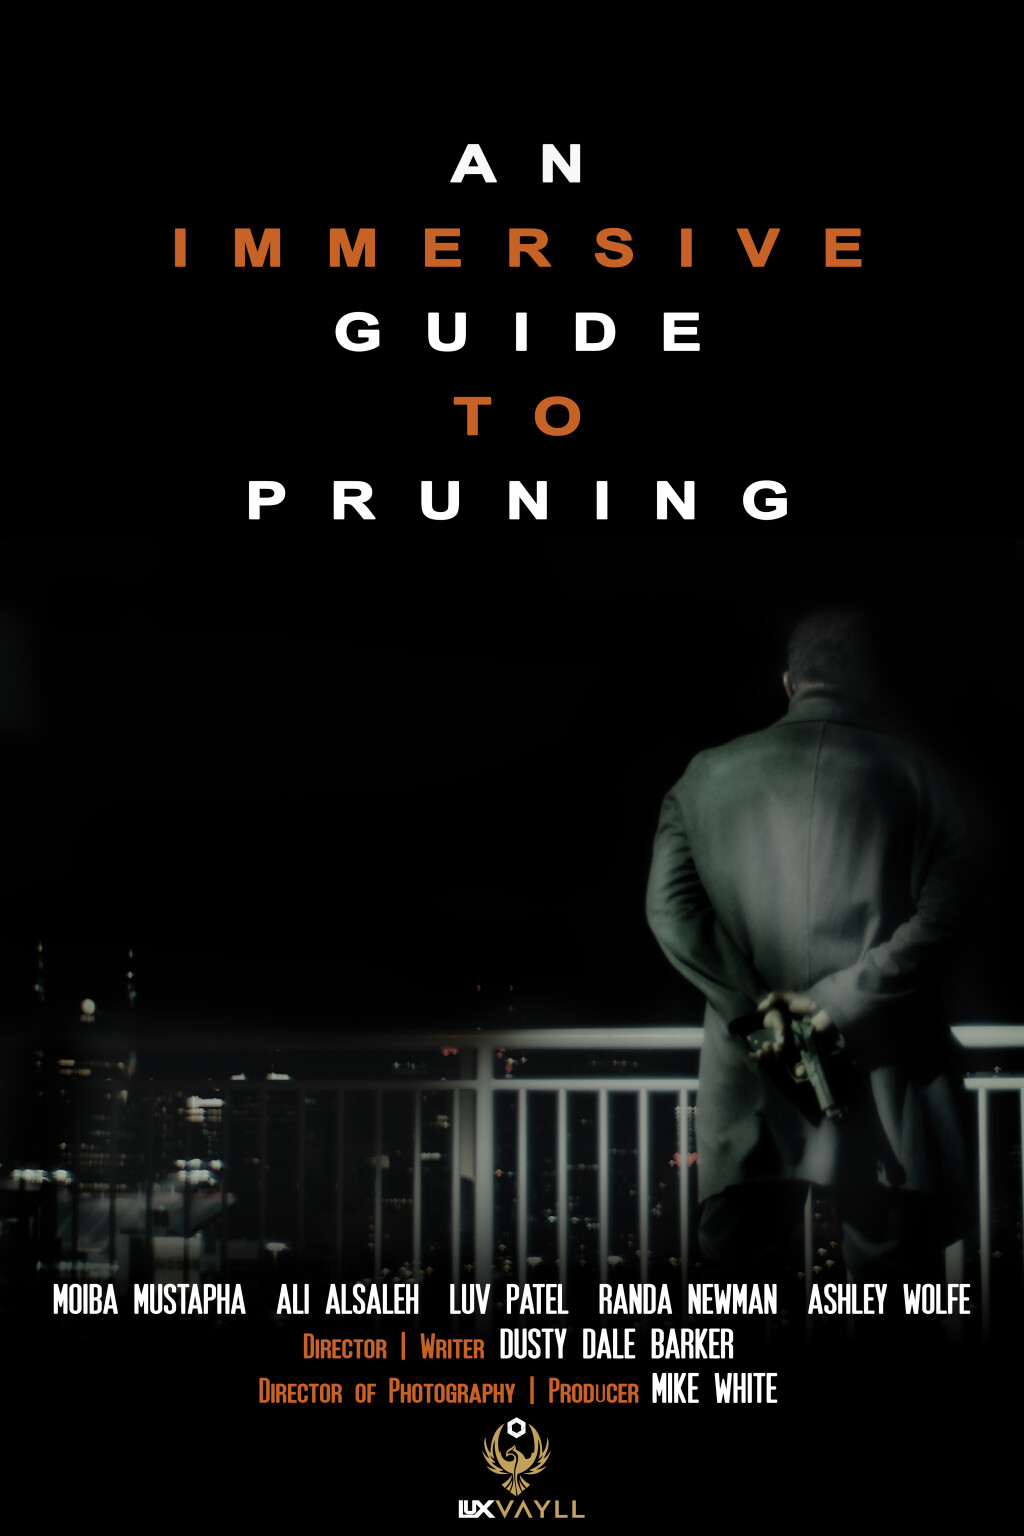 Filmposter for An Immersive Guide to Pruning